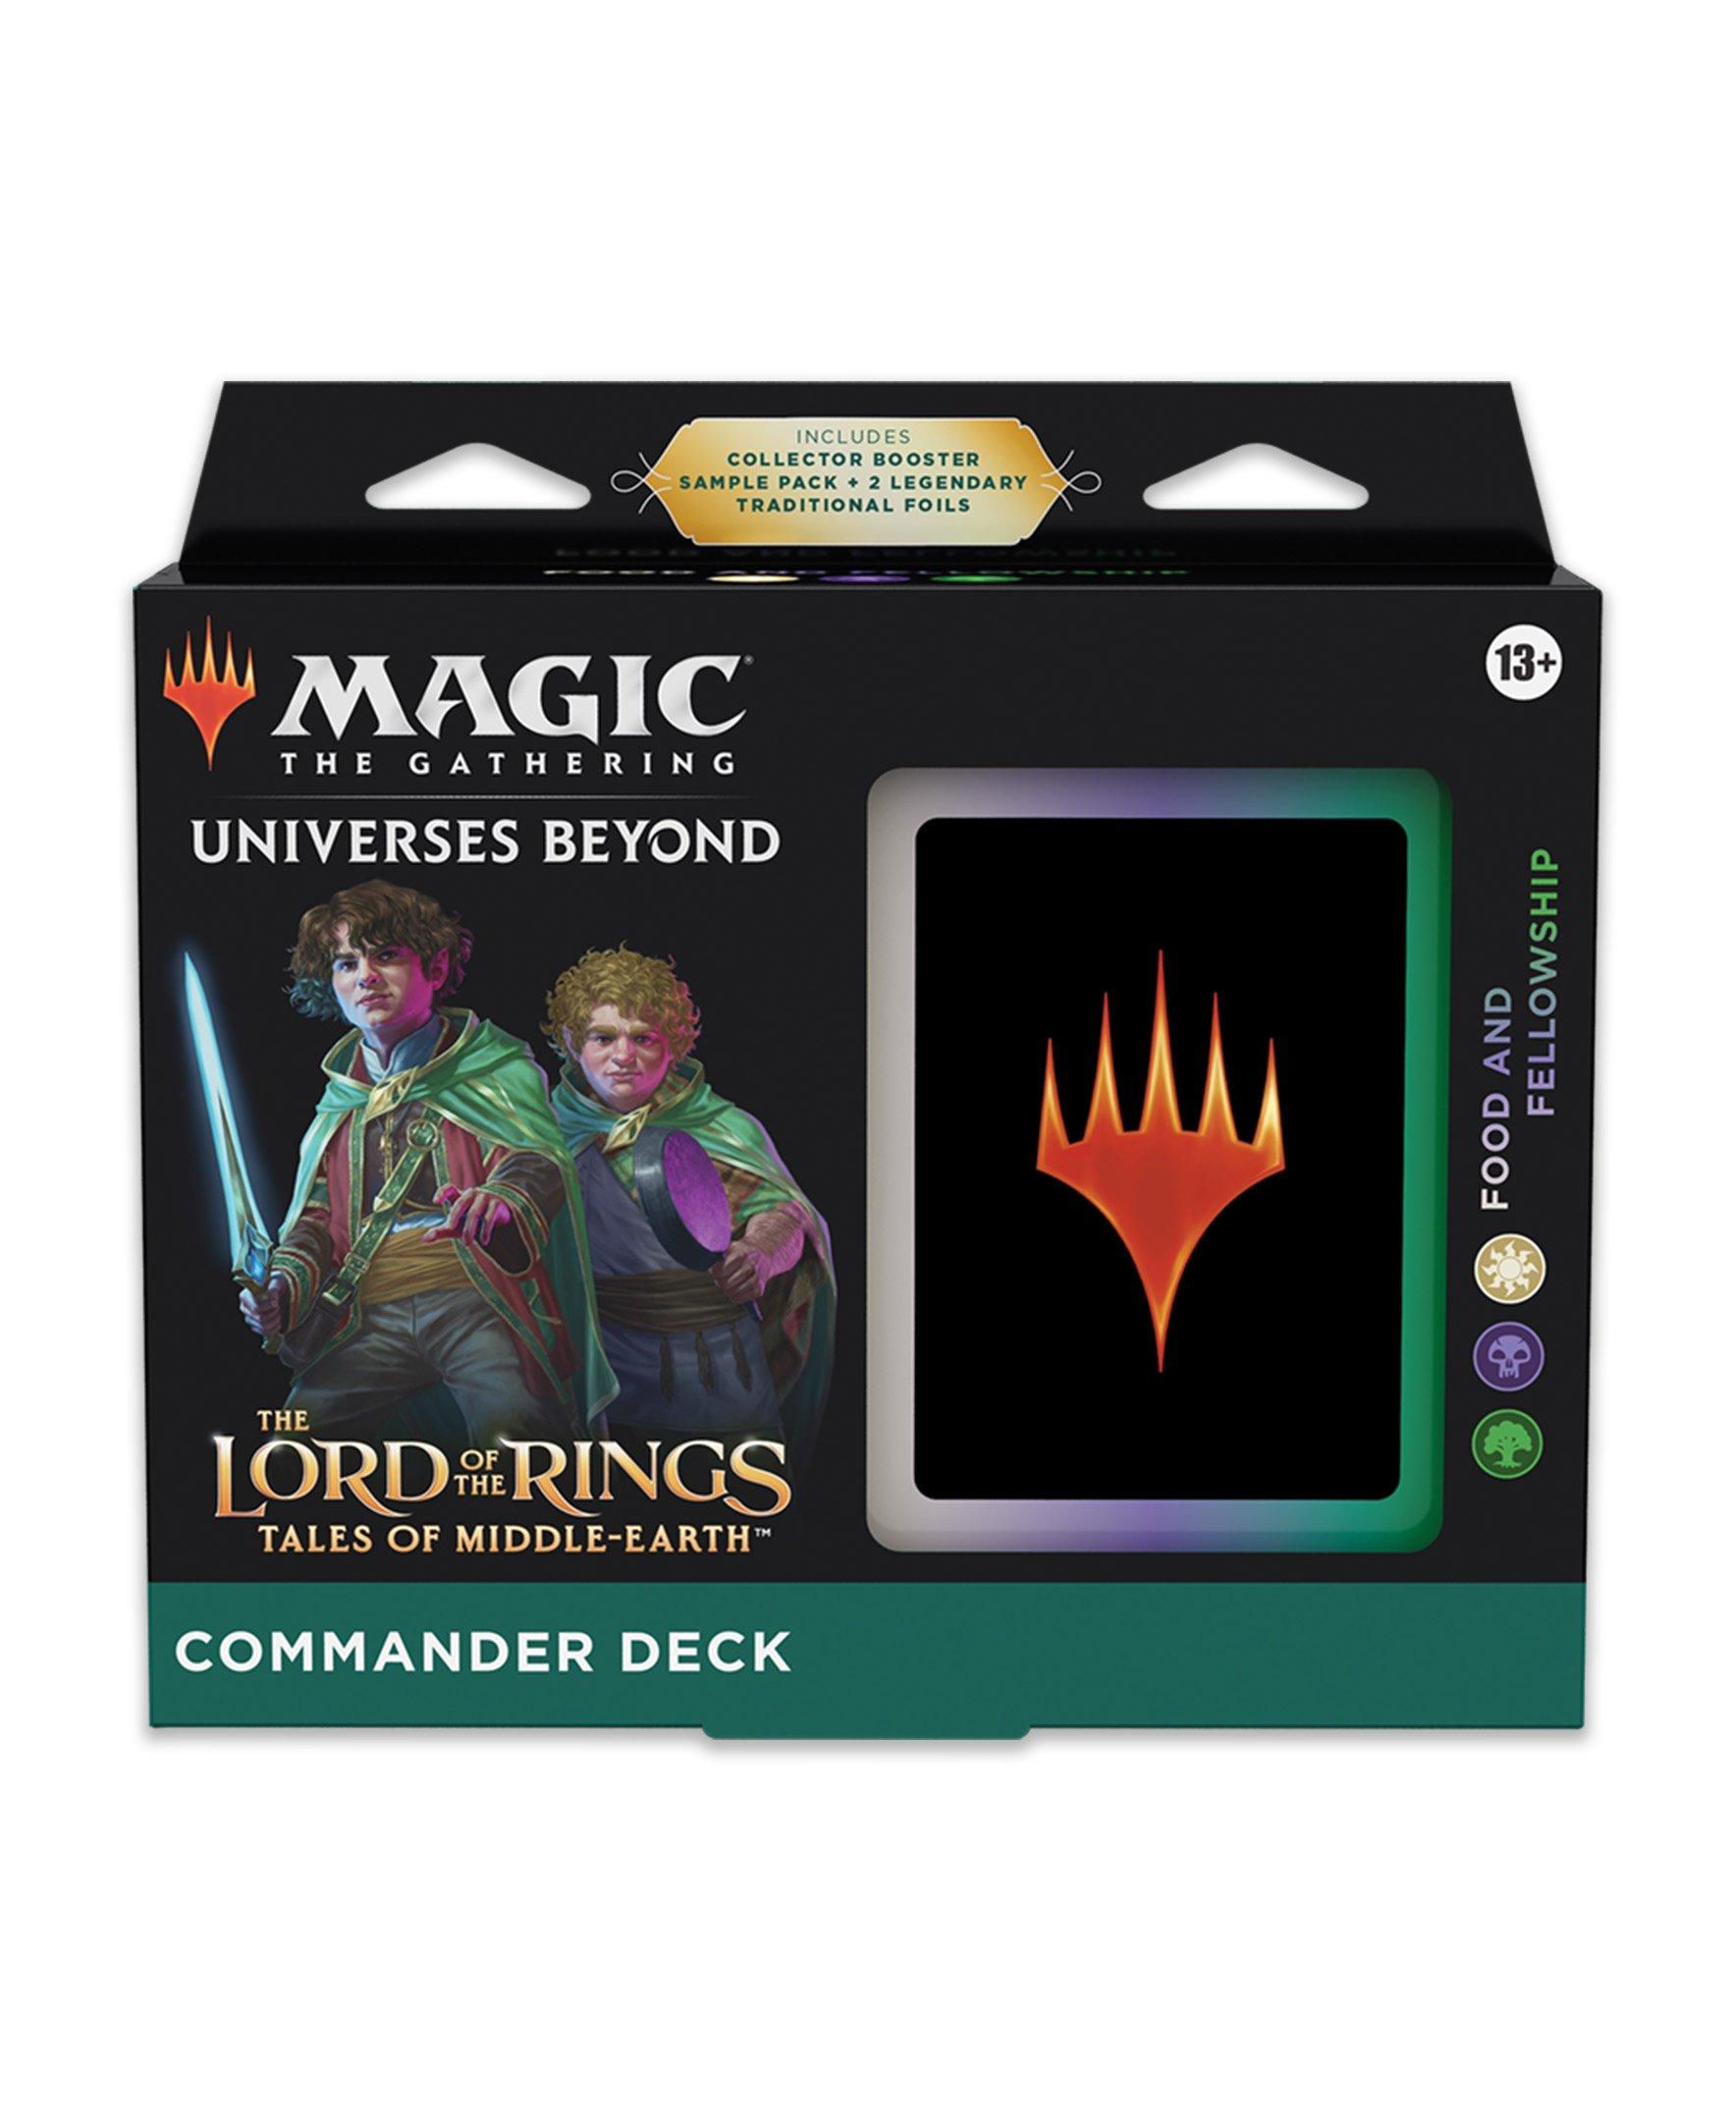 Magic: The Gathering Universes Beyond Lord of the Rings: Tales of